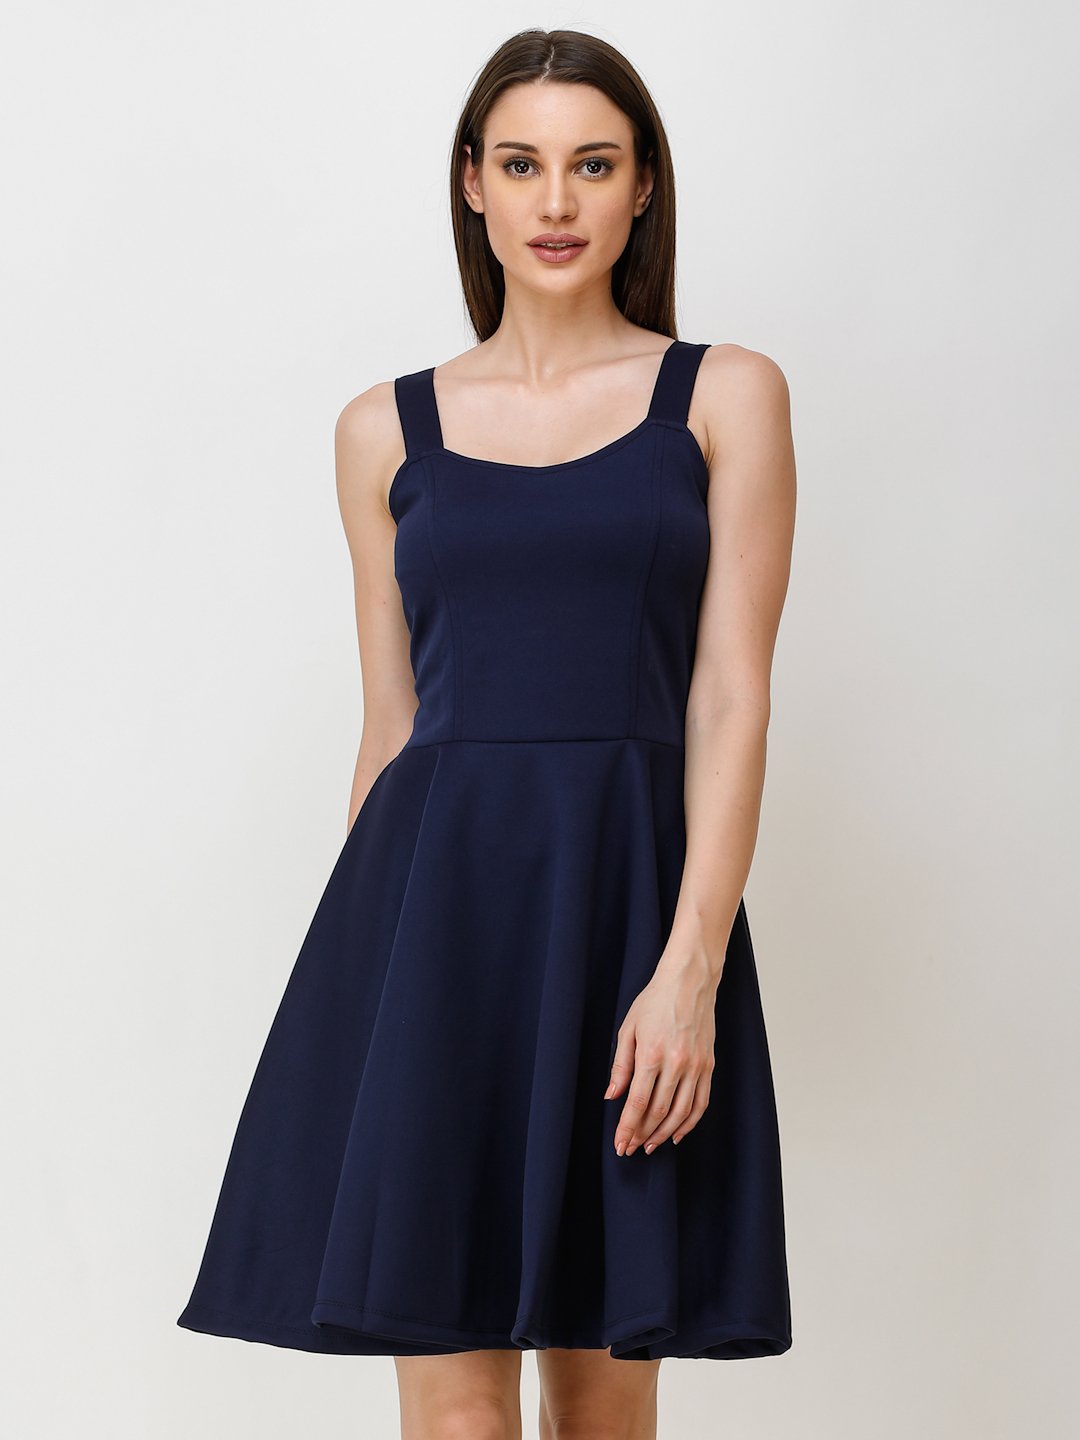 SCORPIUS NAVY STYLED BACK COCKTAIL DRESS